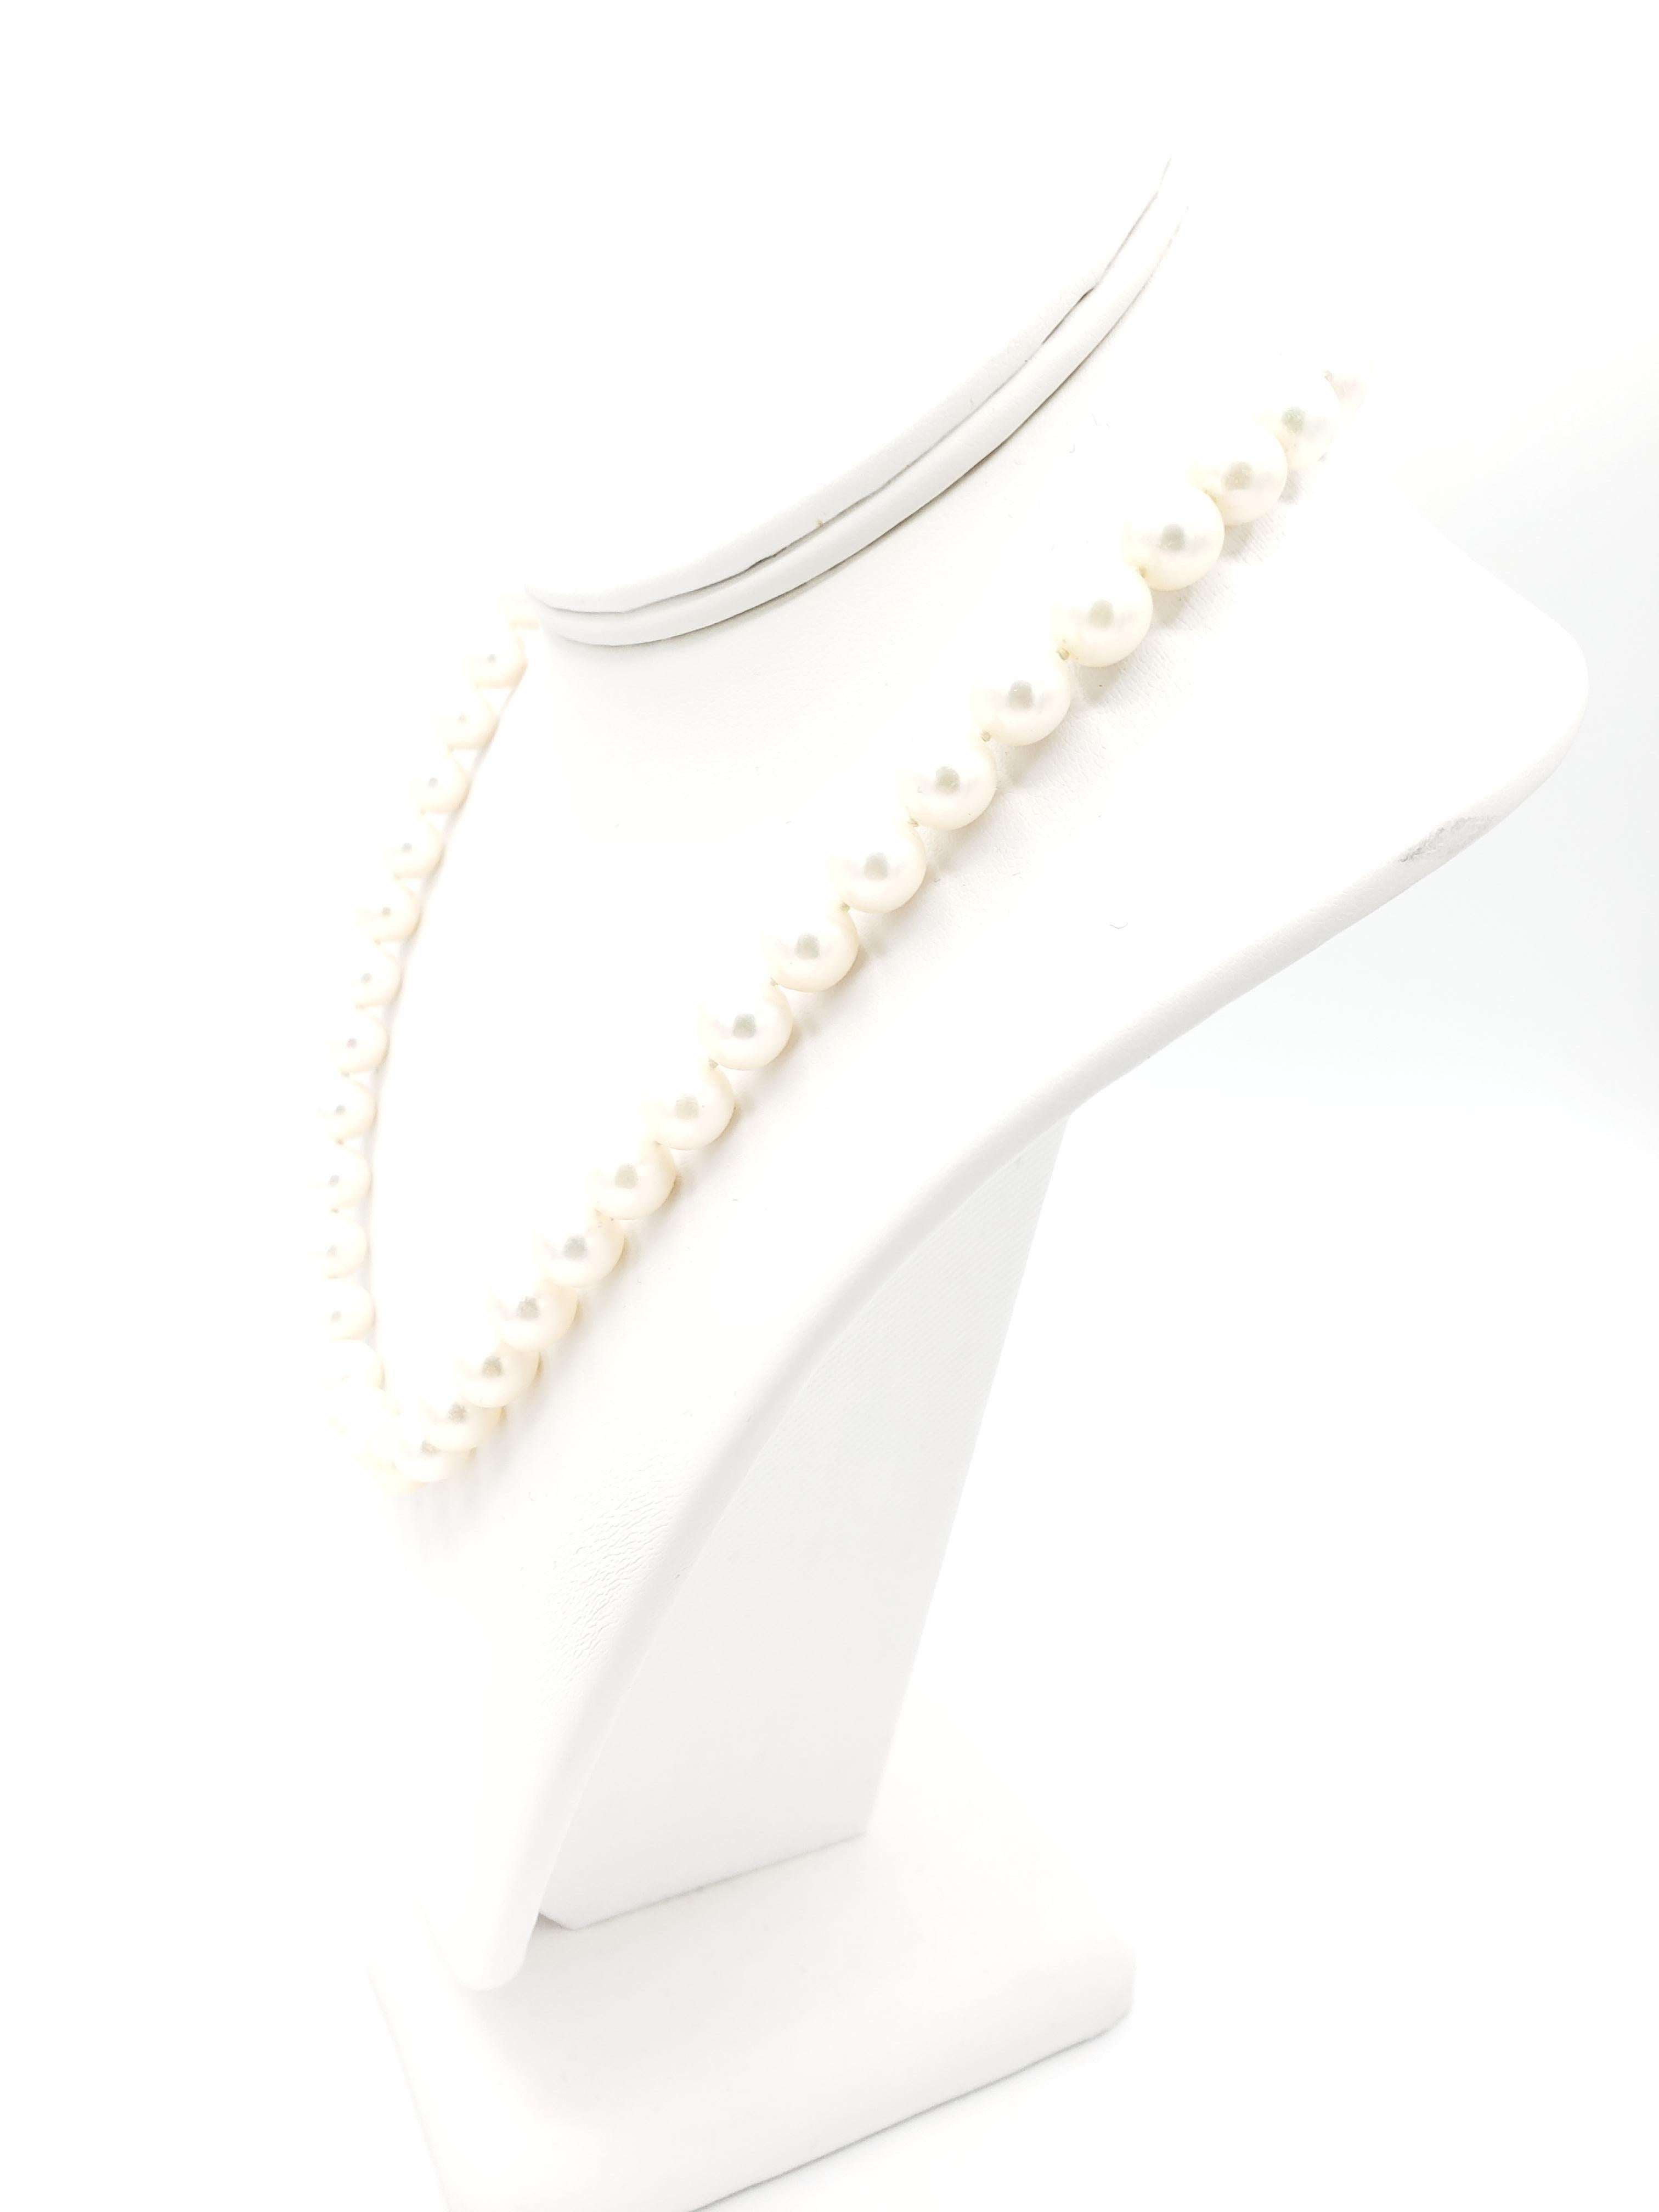 This stunning new necklace is made with AAAA+ quality high lustre Japanese Akoya salt water white pearls, measuring 8.5mm in size. The necklace is 17 1/2 inches in length and features a secure clasp. The pearls are perfectly round and beautiful